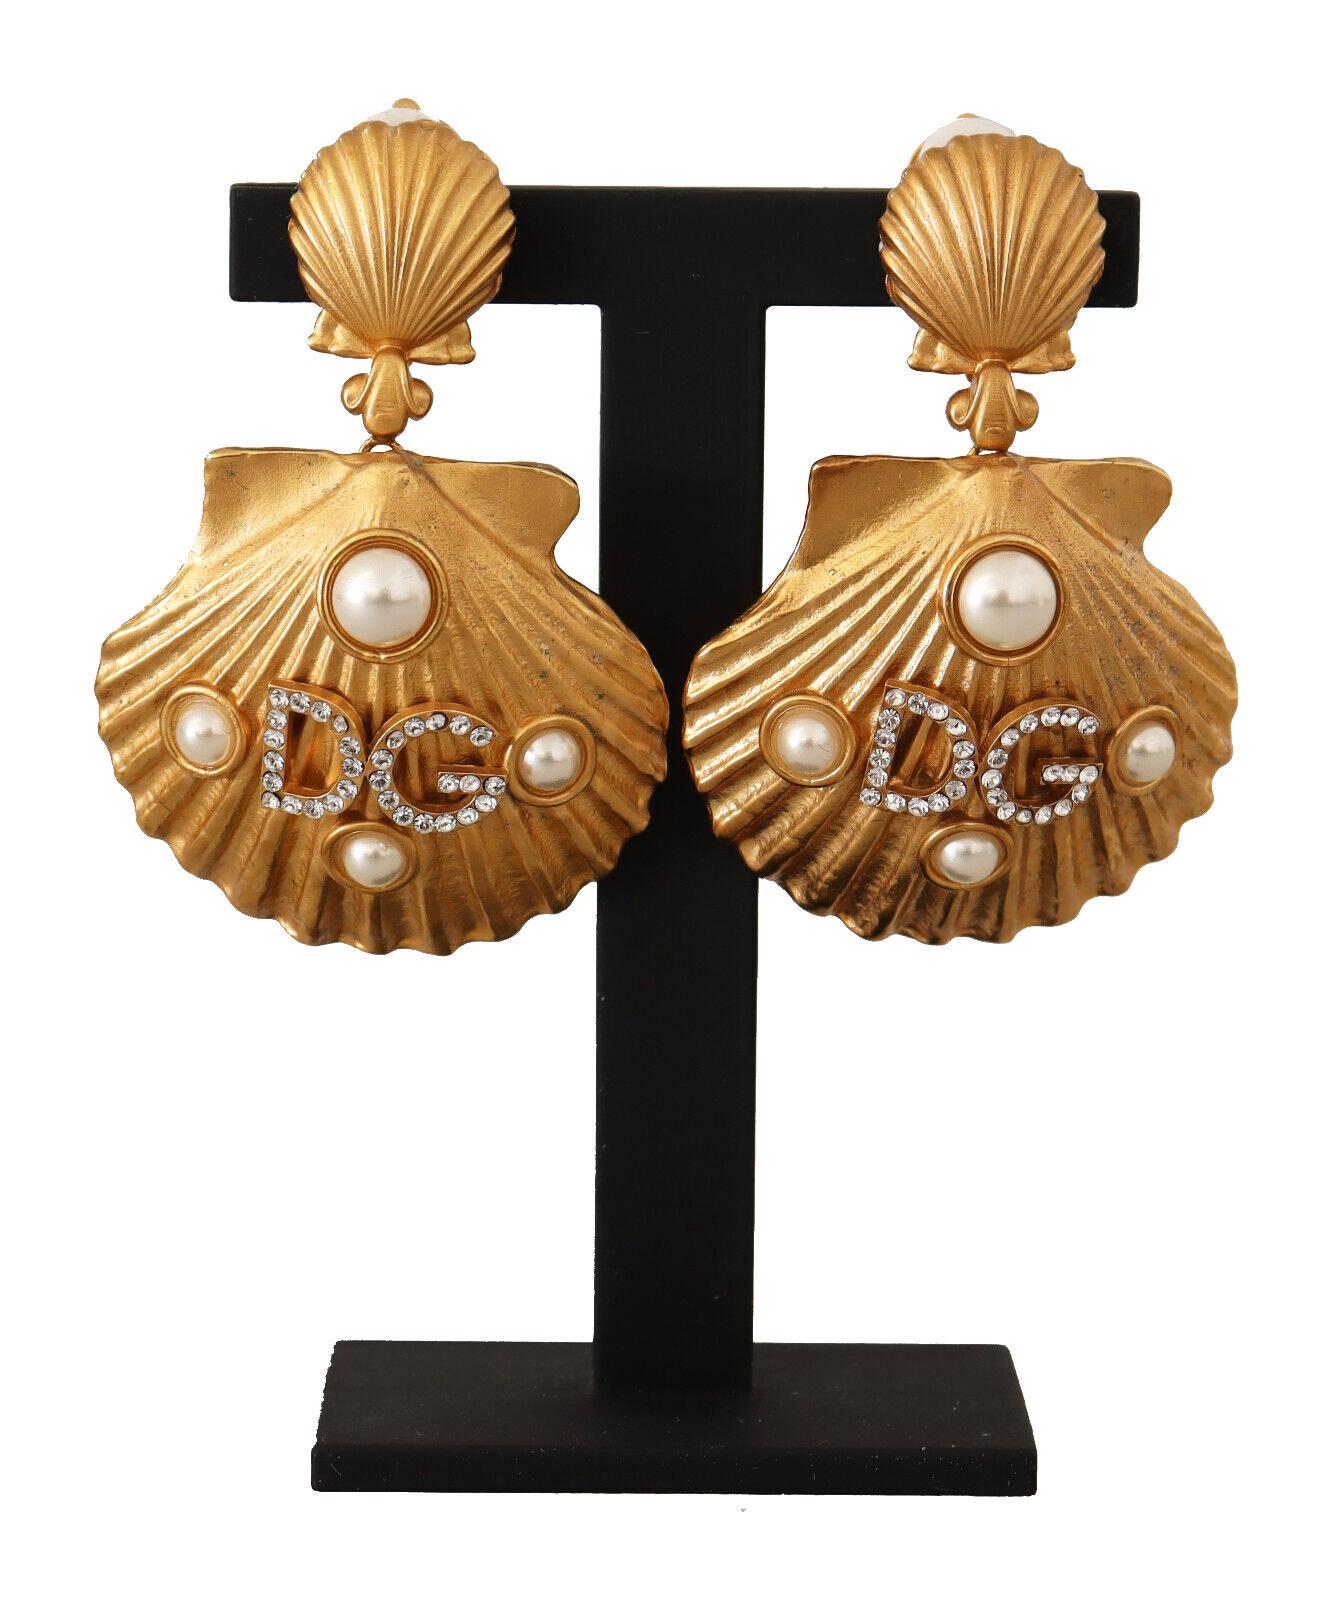 DOLCE & GABBANA

Gorgeous brand new with tags, 100% Authentic Dolce & Gabbana Earrings.



Model: Clip-on Dangling
Motive: Seashell
Material: 80% Brass, 20% Glass

Color: Gold

Logo details
Made in Italy

Length: 5cm


Dolce & Gabbana Box, Original